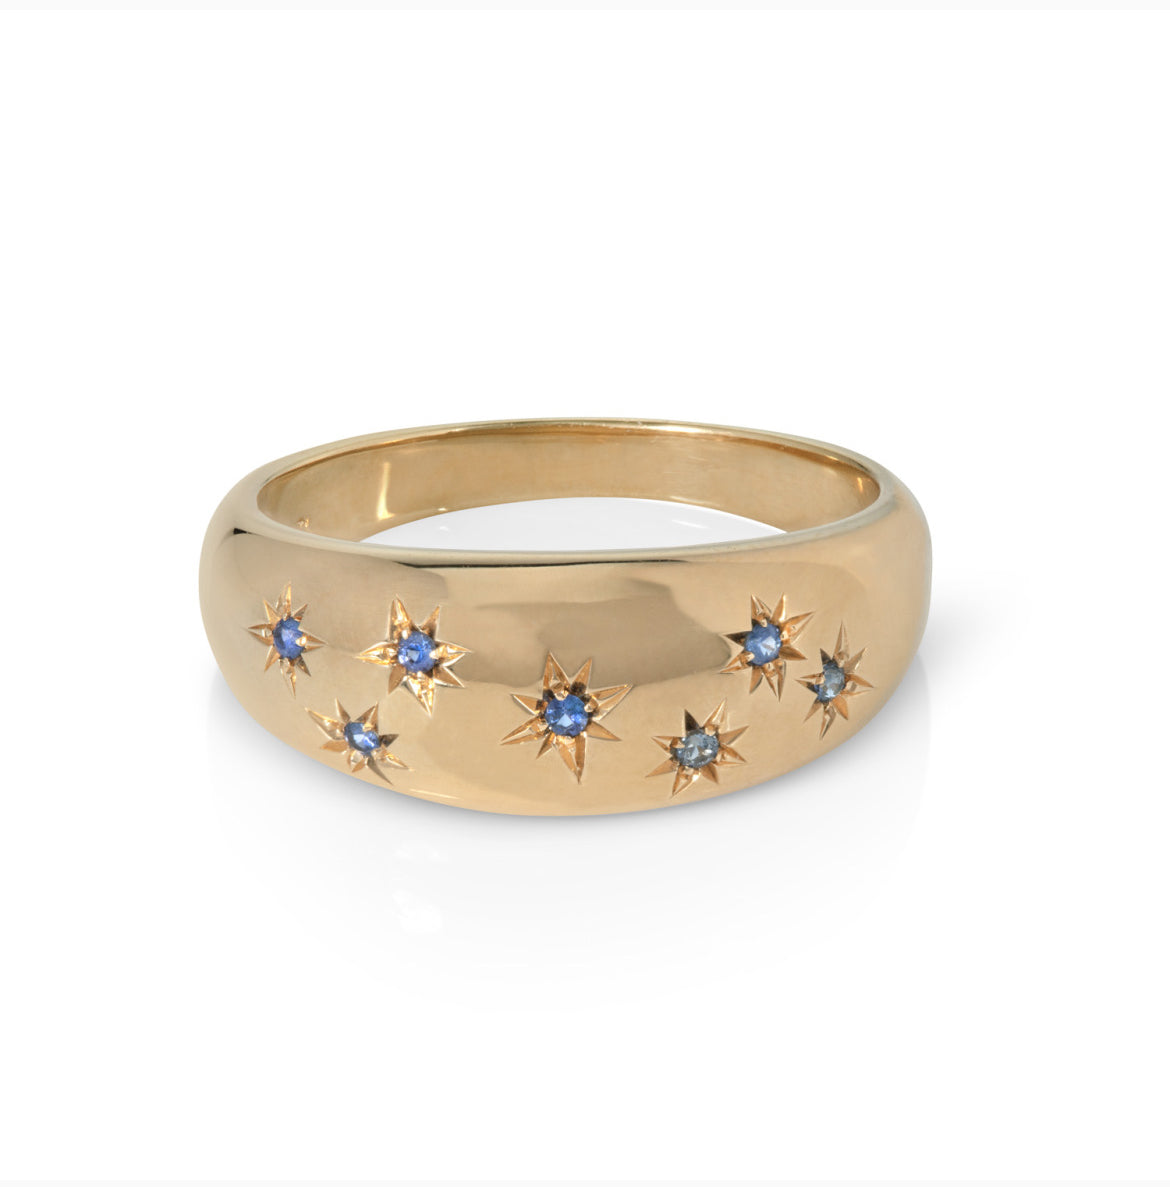 Make a Wish, Star Studded Dome Ring in Sapphire or Champagne Diamonds